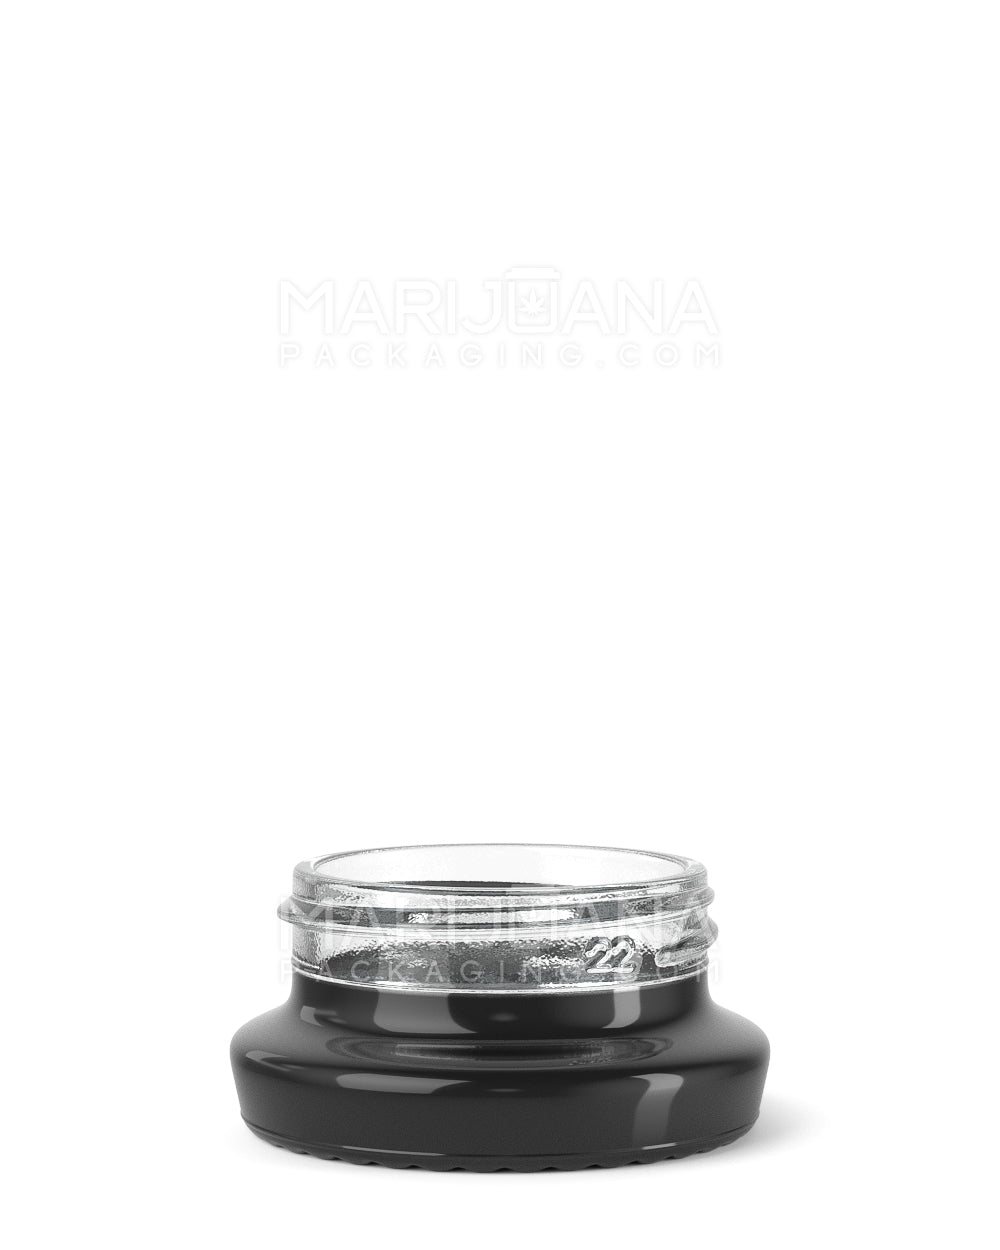 Black Glass Concentrate Containers 38mm - 9mL - 240 Count | Sample